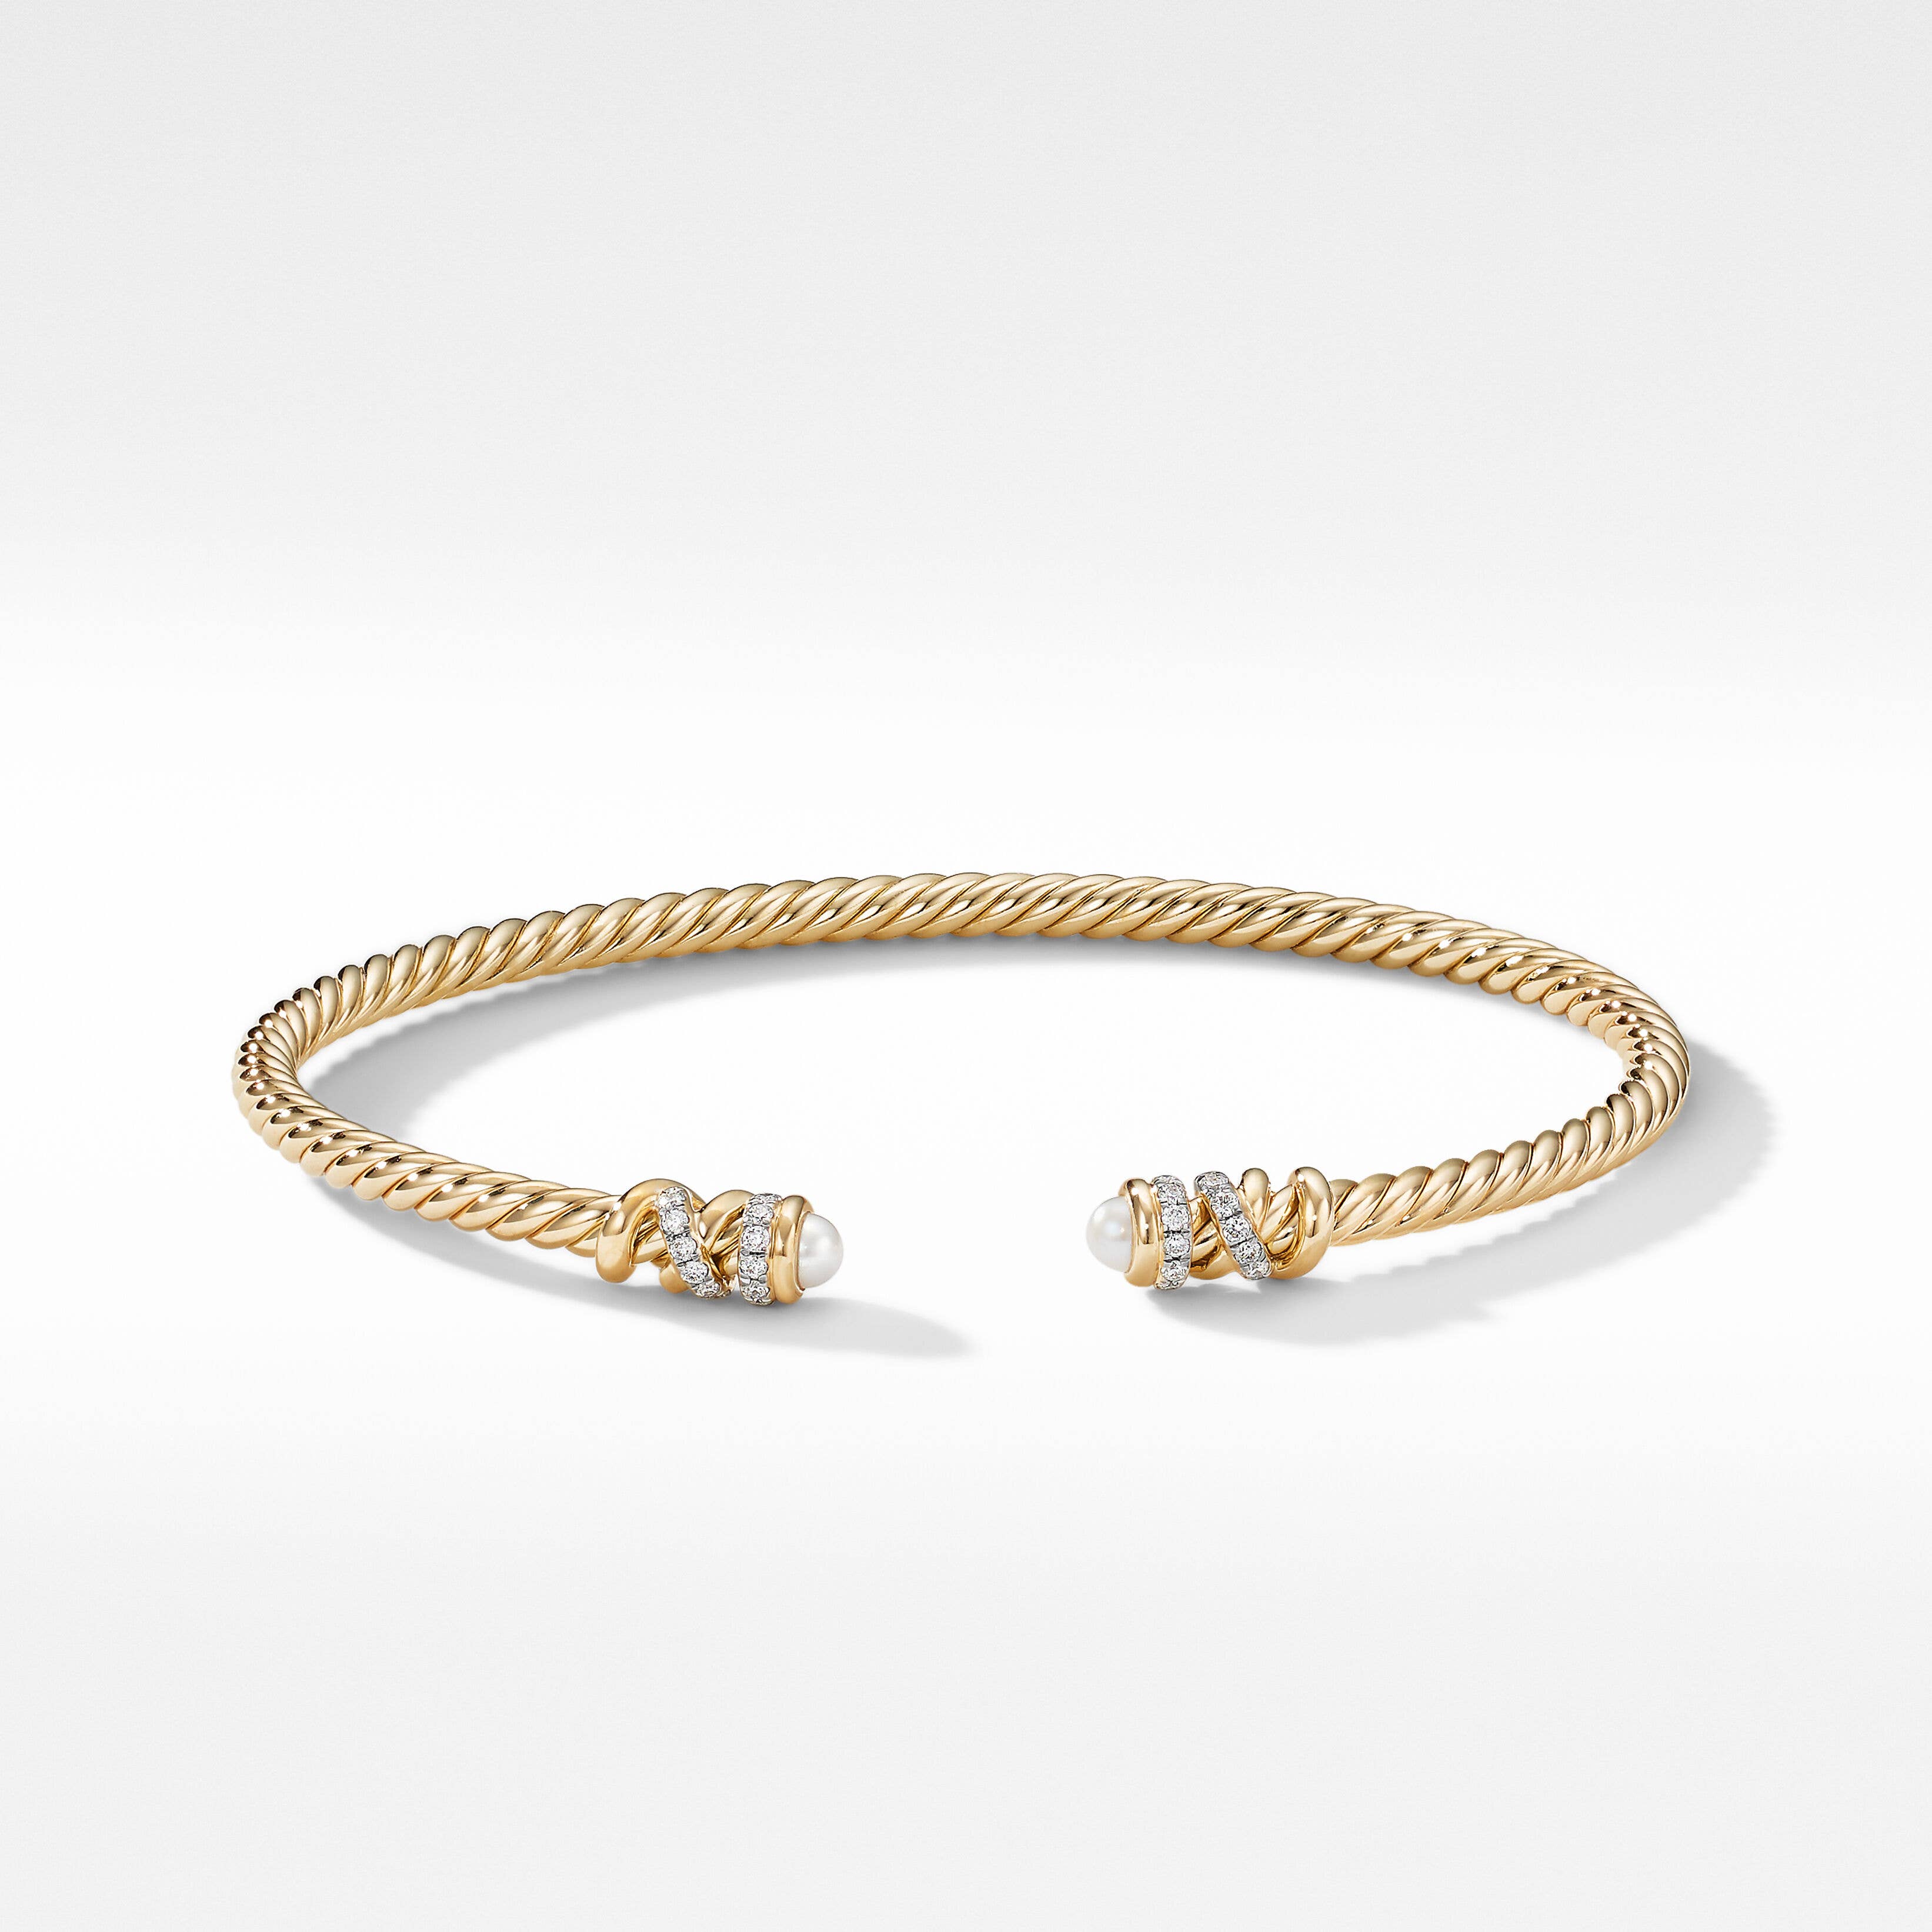 Petite Helena Color Bracelet in 18K Yellow Gold with Pearls and Pavé Diamonds